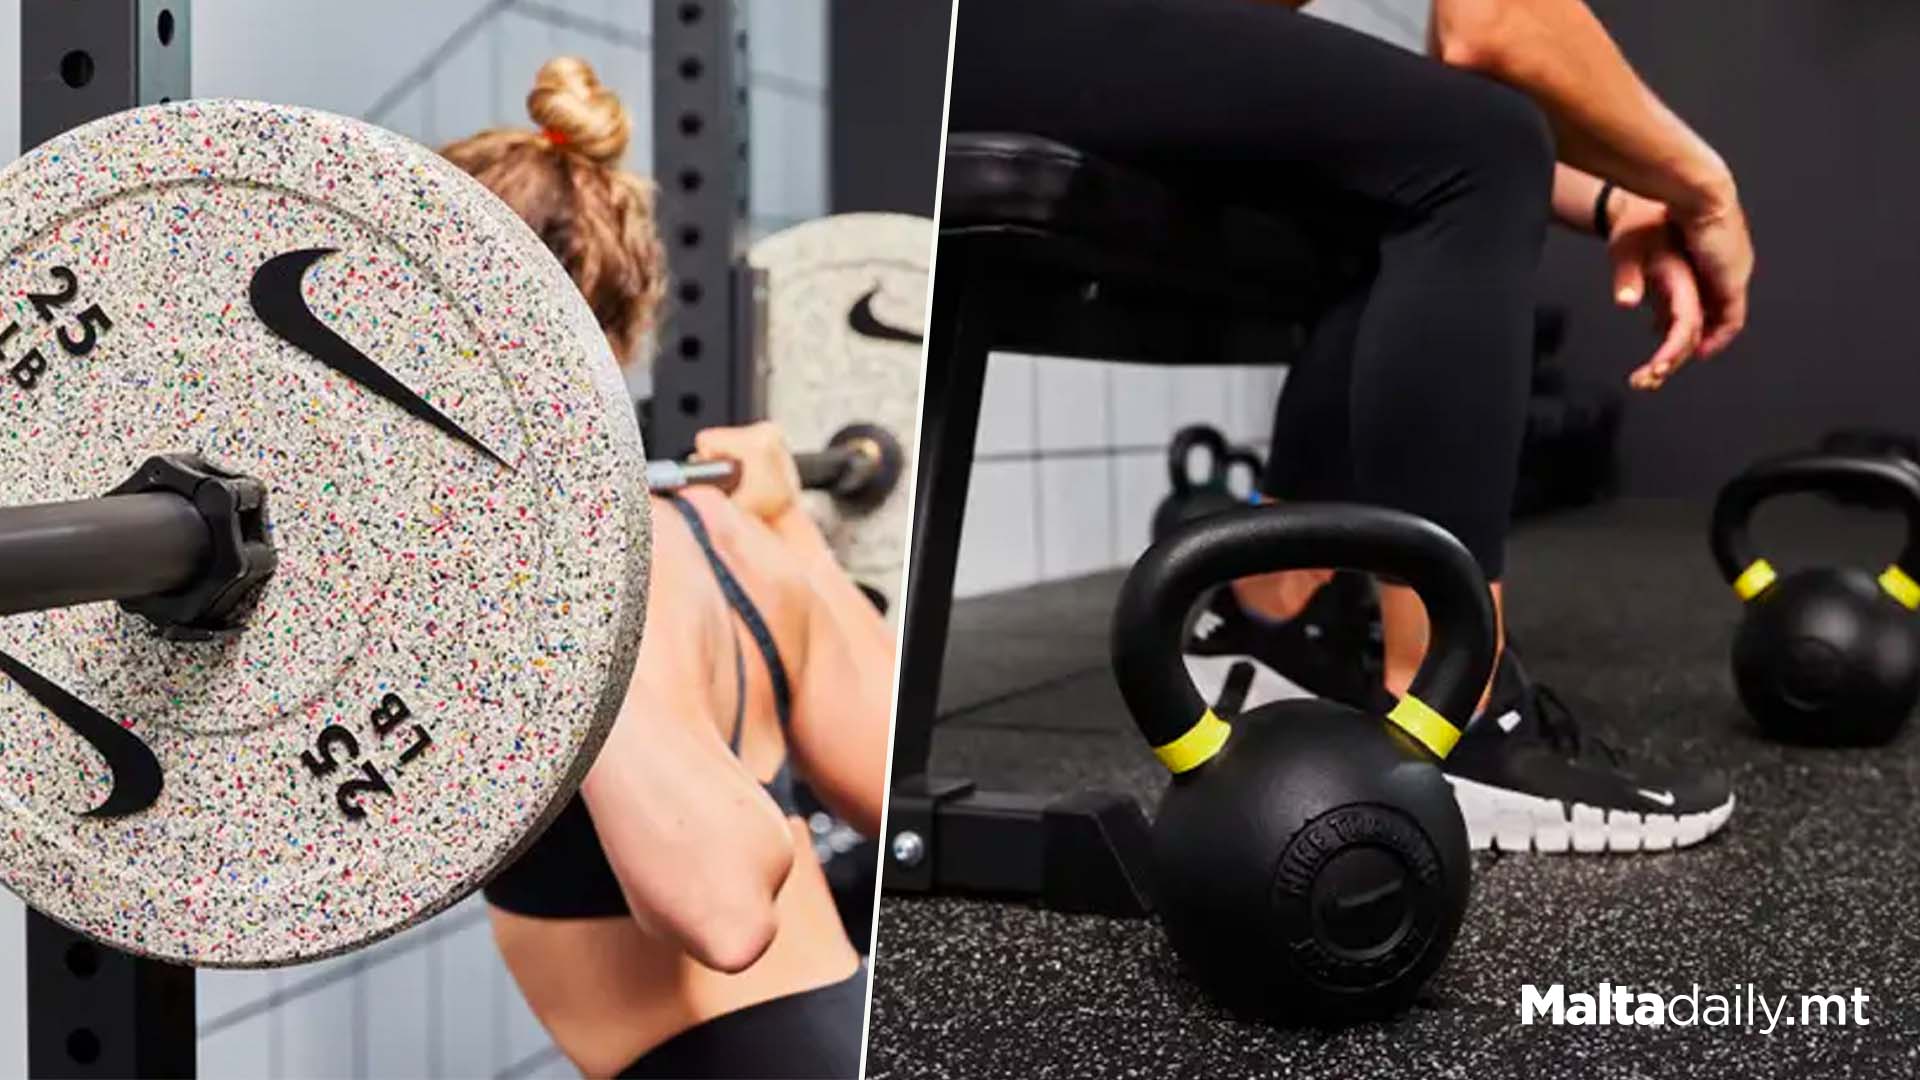 Nike Officially Selling Gym Equipment: 'Gym Strength'